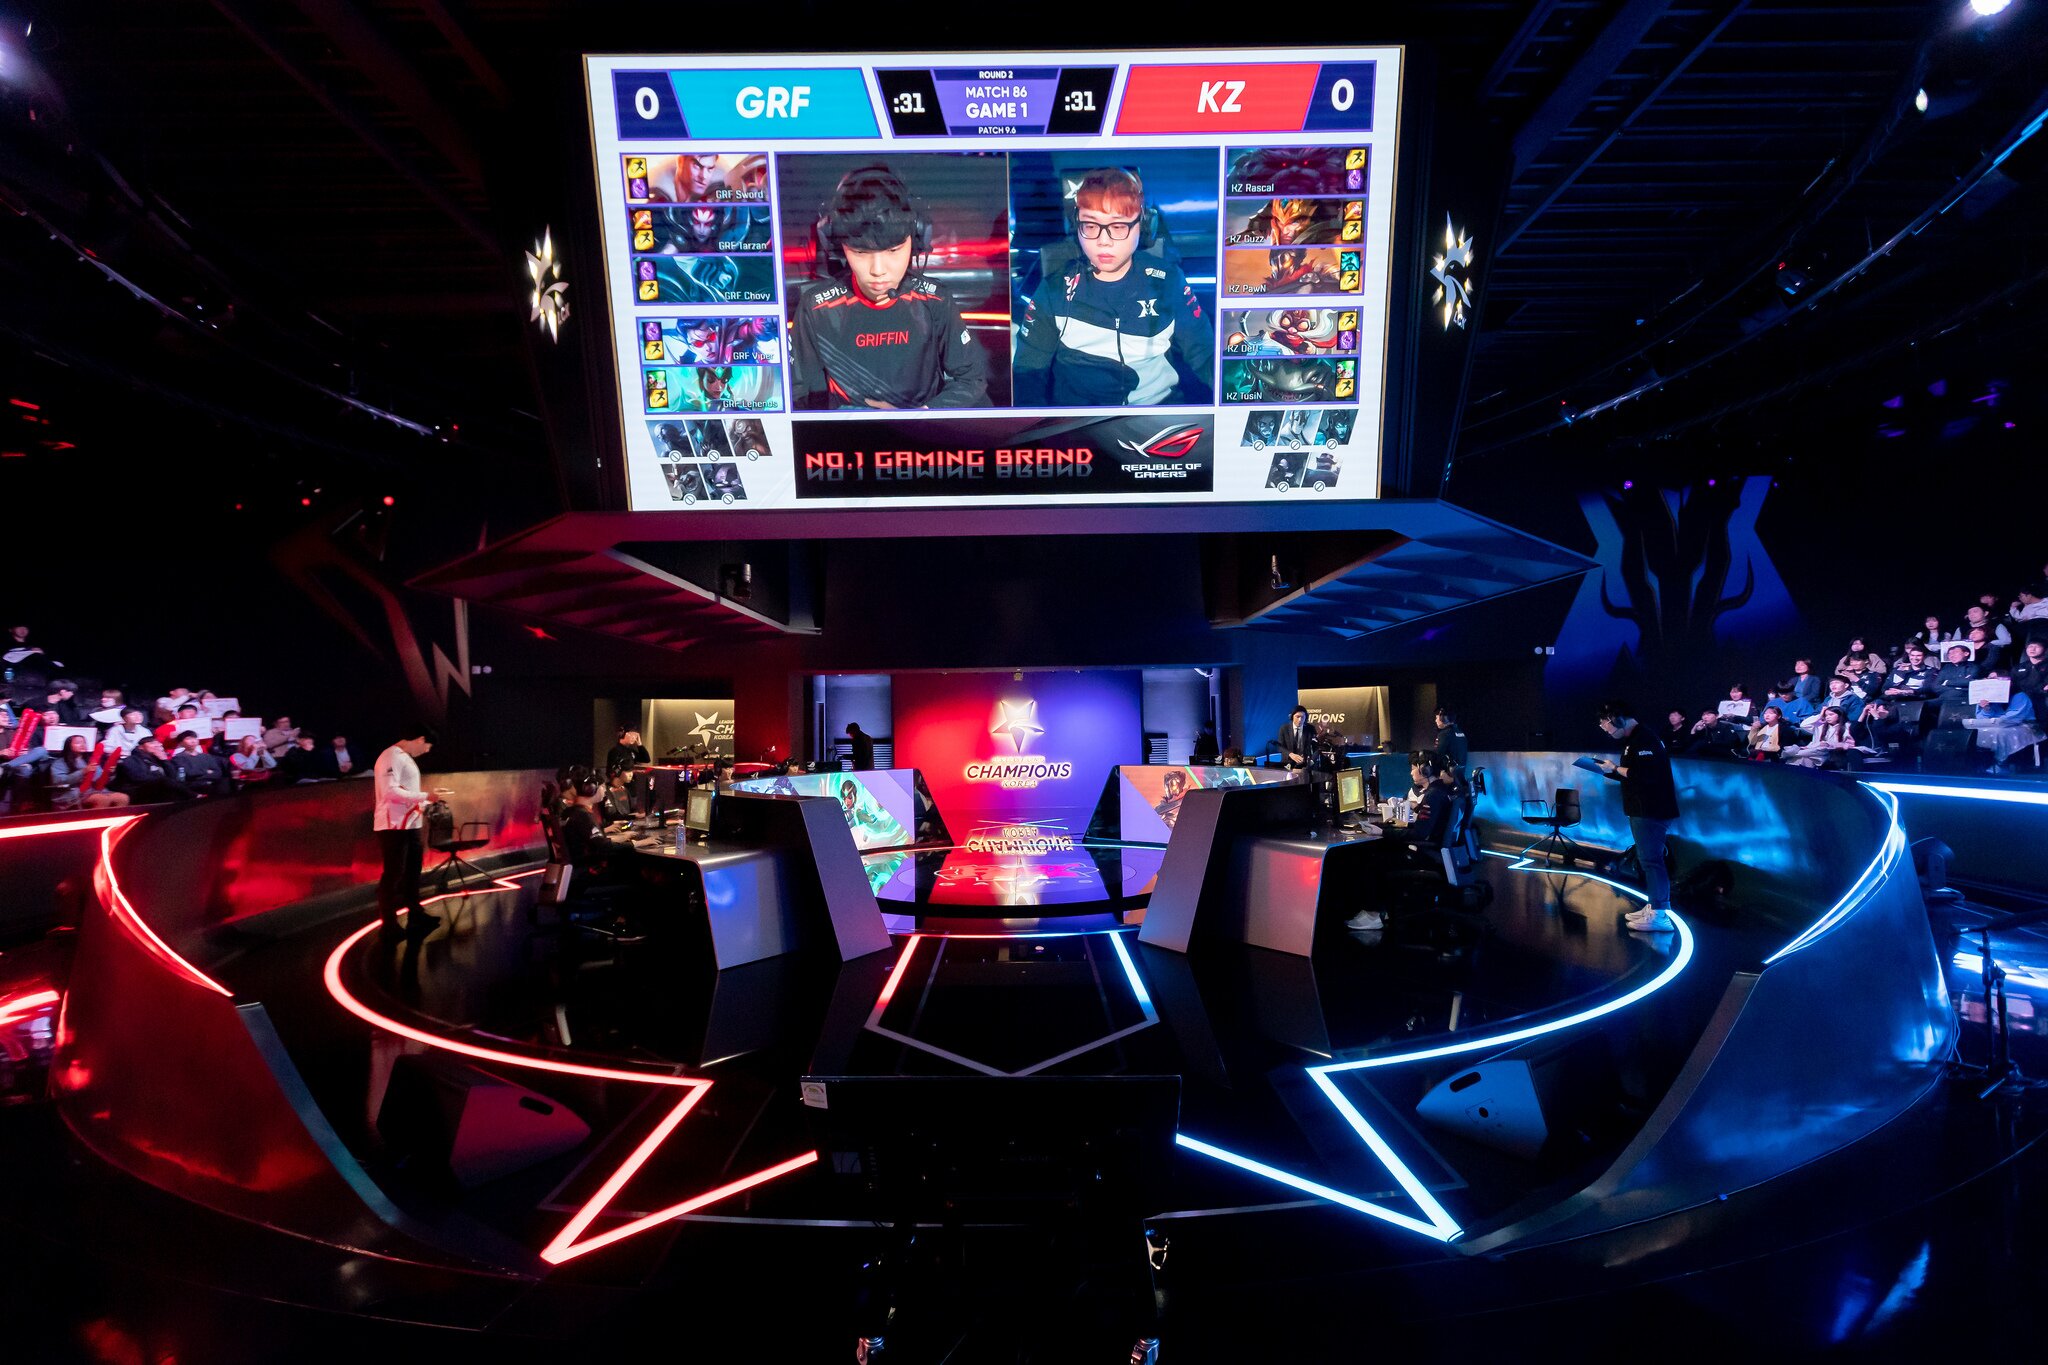 Kingzone DragonX proved that they are legit contenders to win the playoffs (Photo courtesy of LCK)